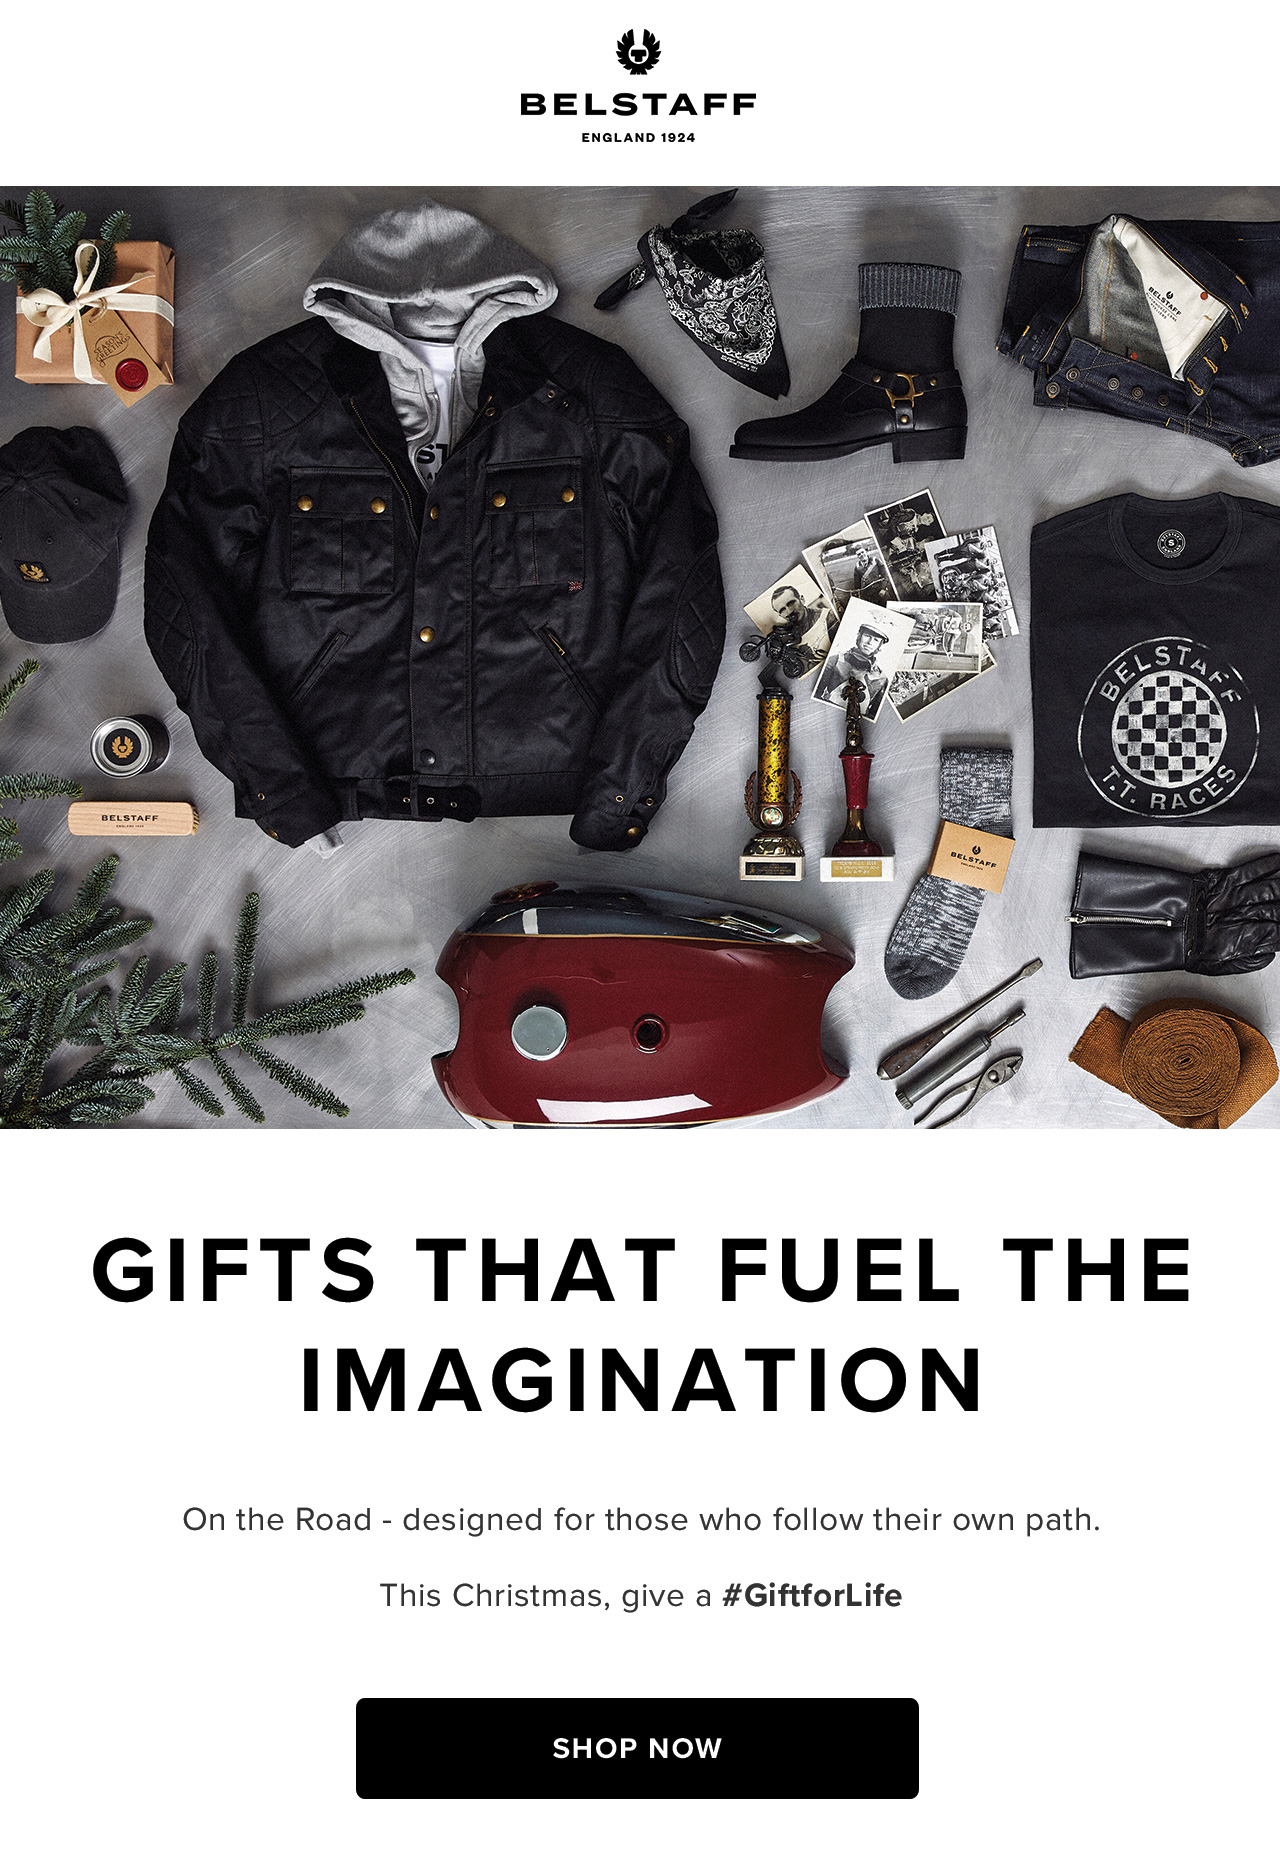 On the Road - designed for those who follow their own path. This Christmas, give a #GiftforLife